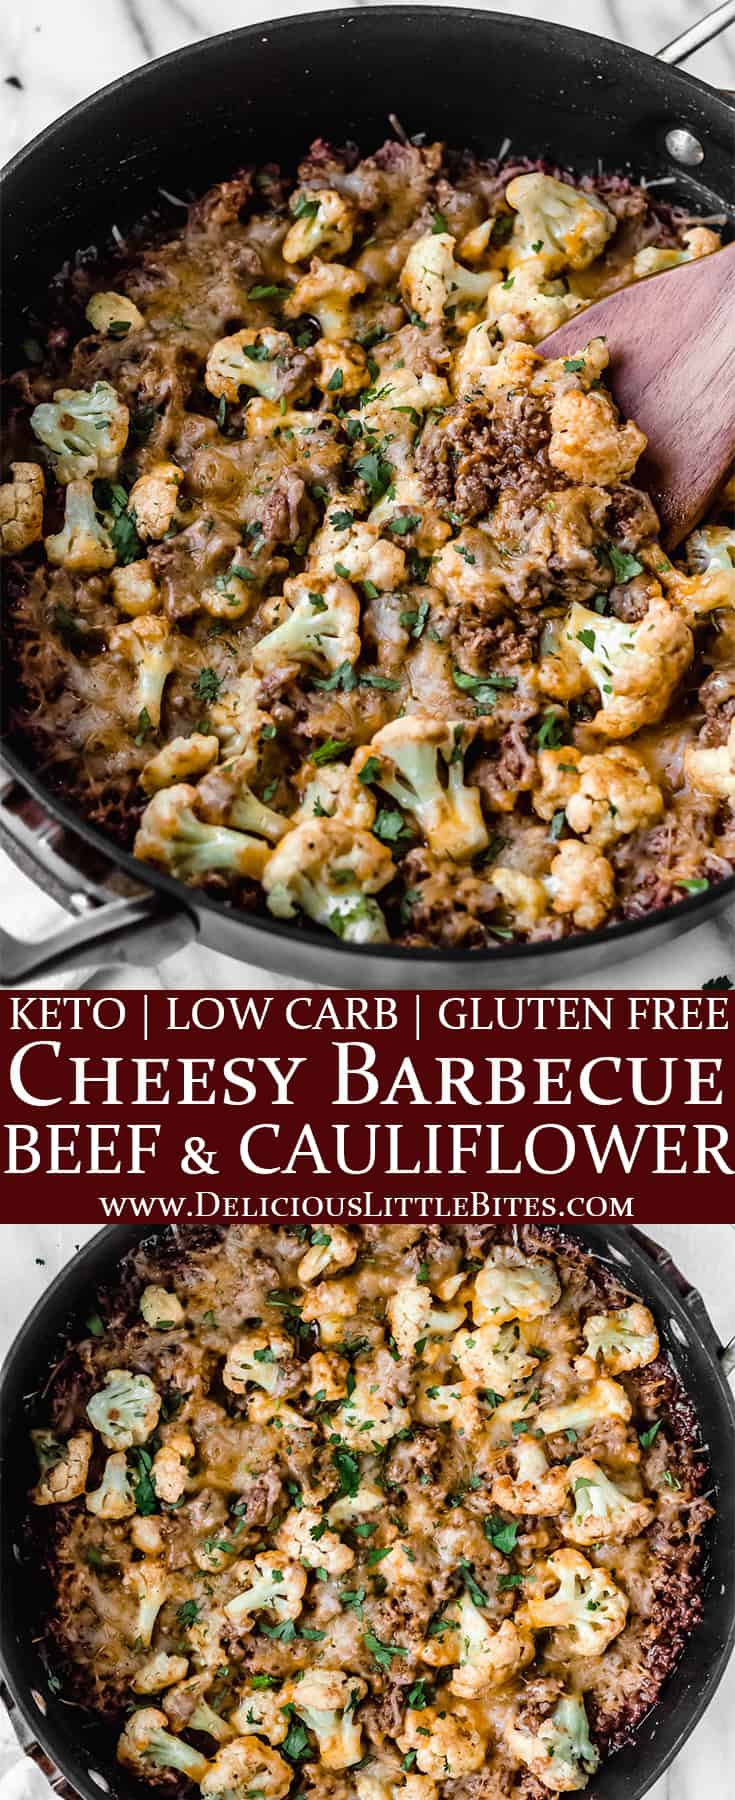 Keto Cheesy Barbecue Ground Beef and Cauliflower Skillet - Delicious ...